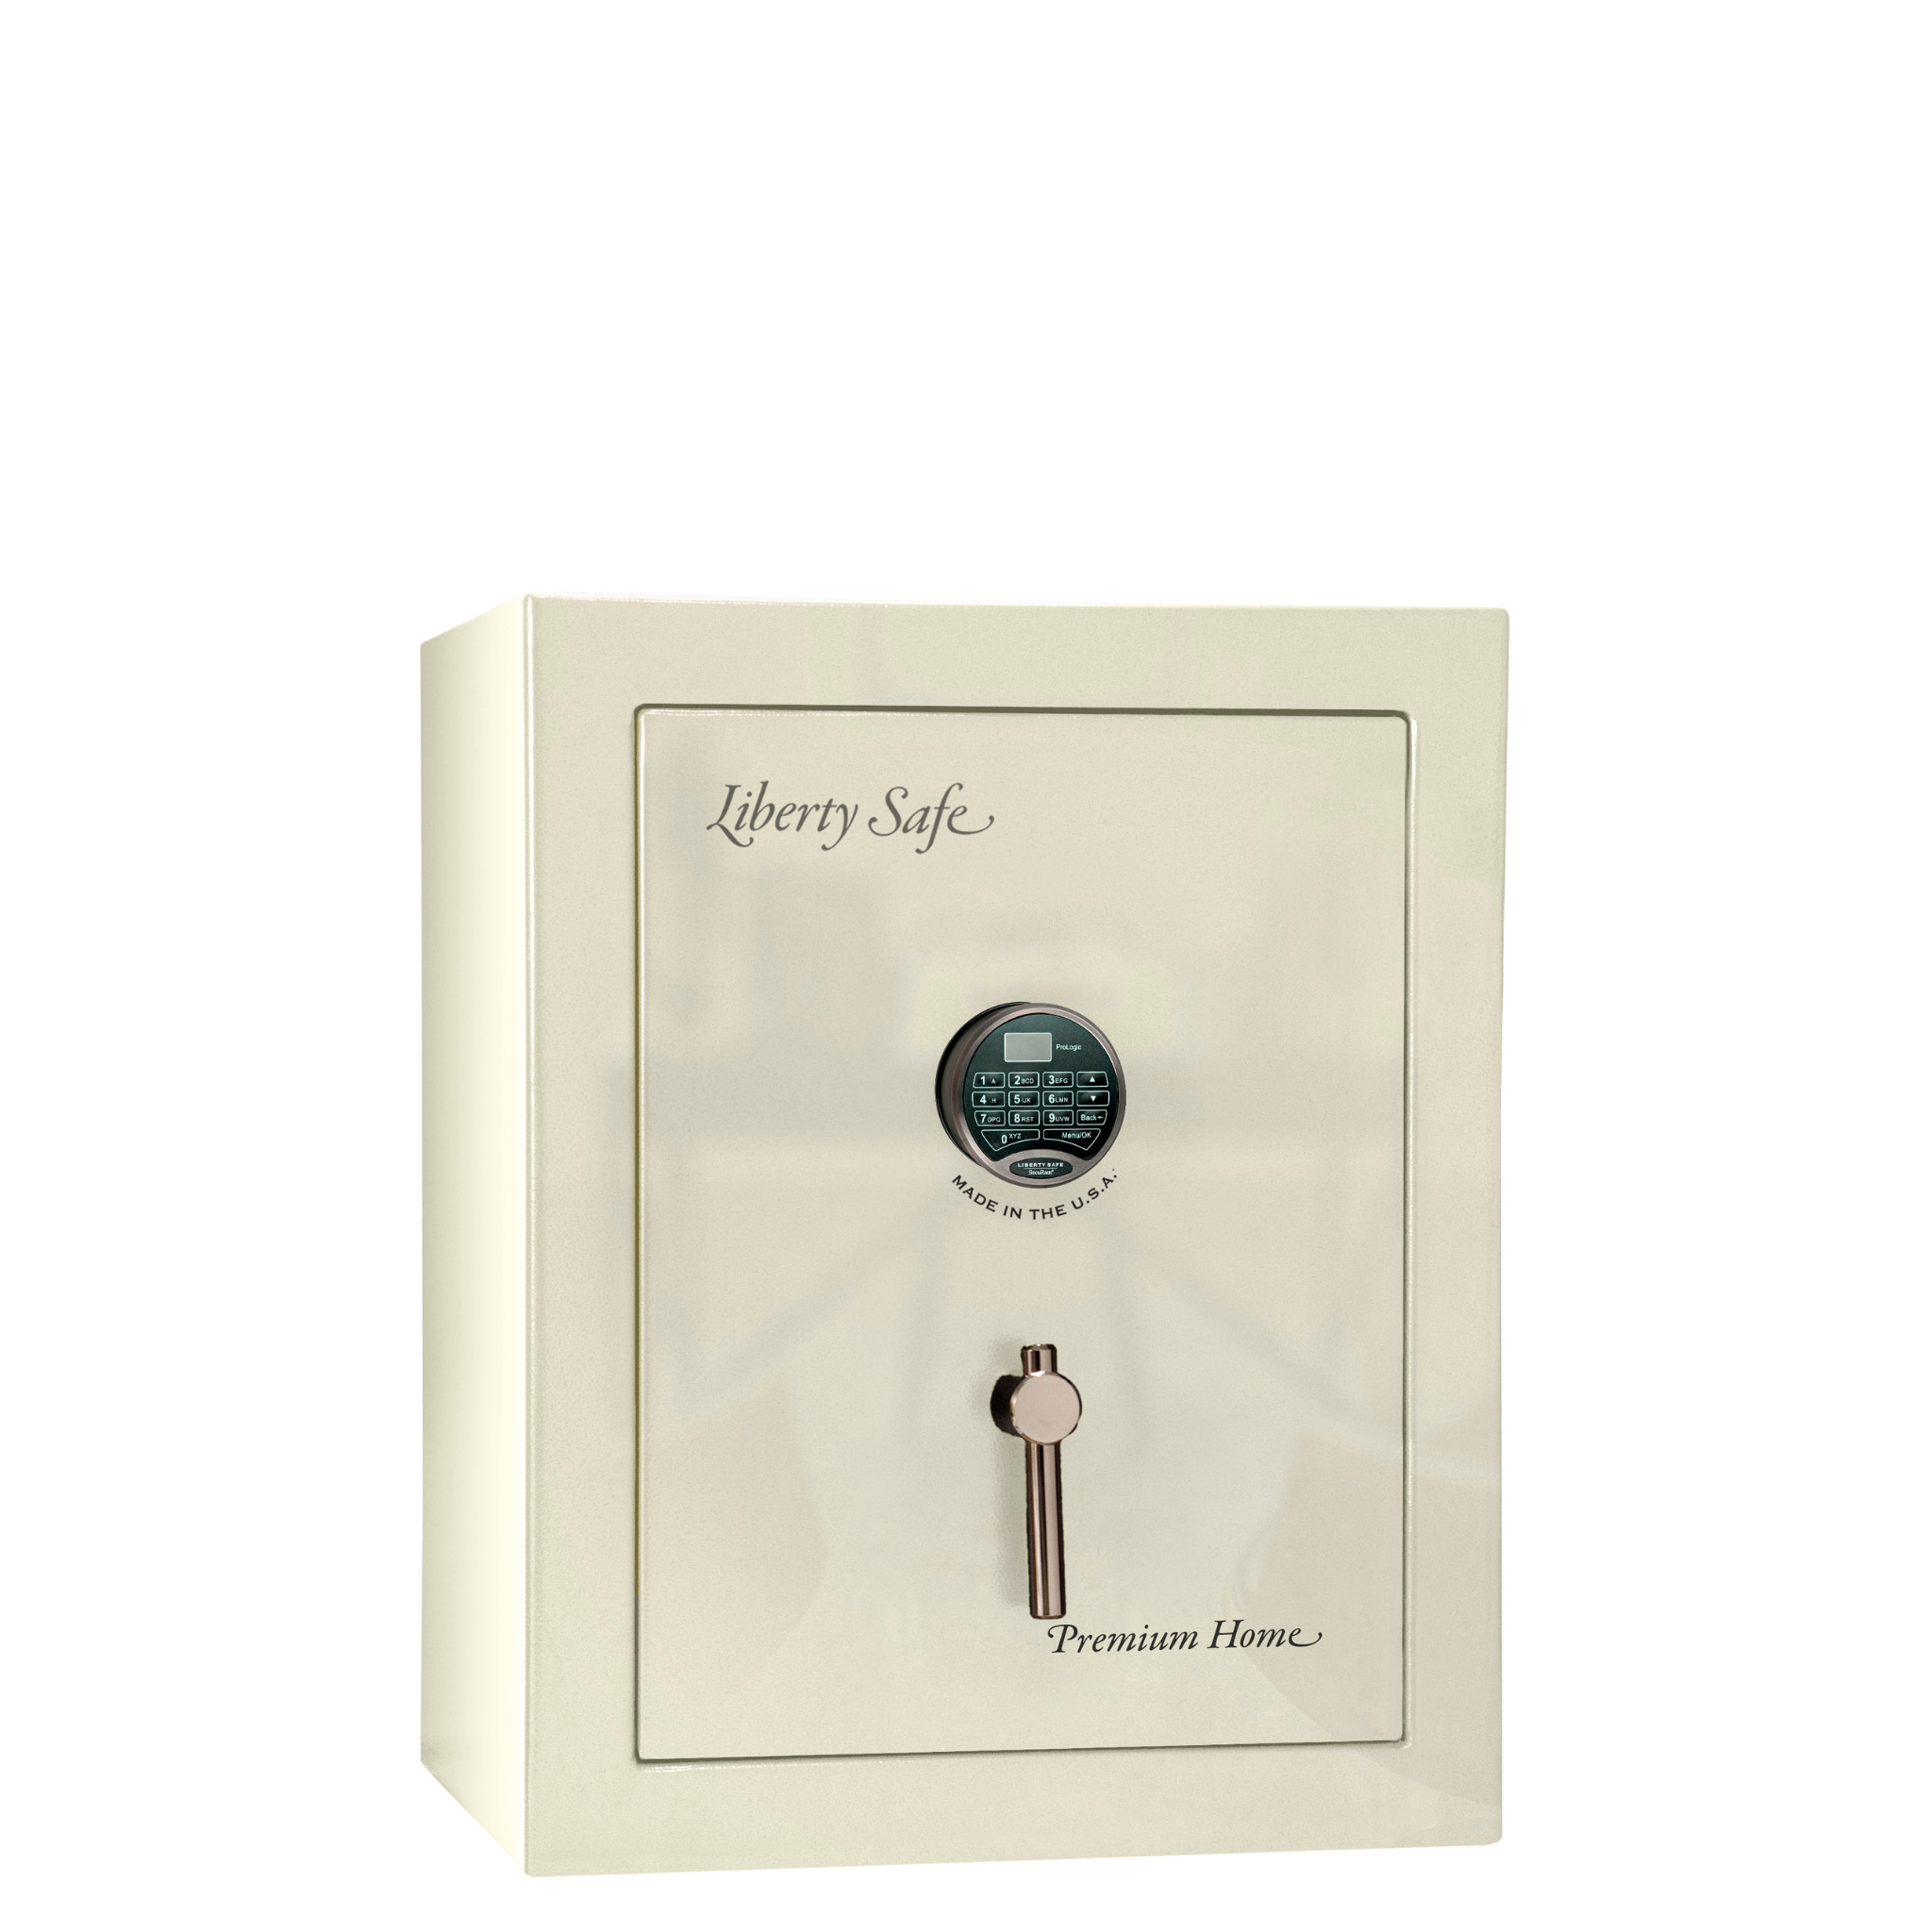 Premium Home Series | Level 7 Security | 2 Hour Fire Protection | 08 | Dimensions: 29.75"(H) x 24.5"(W) x 19"(D) | White Gloss - Closed Door